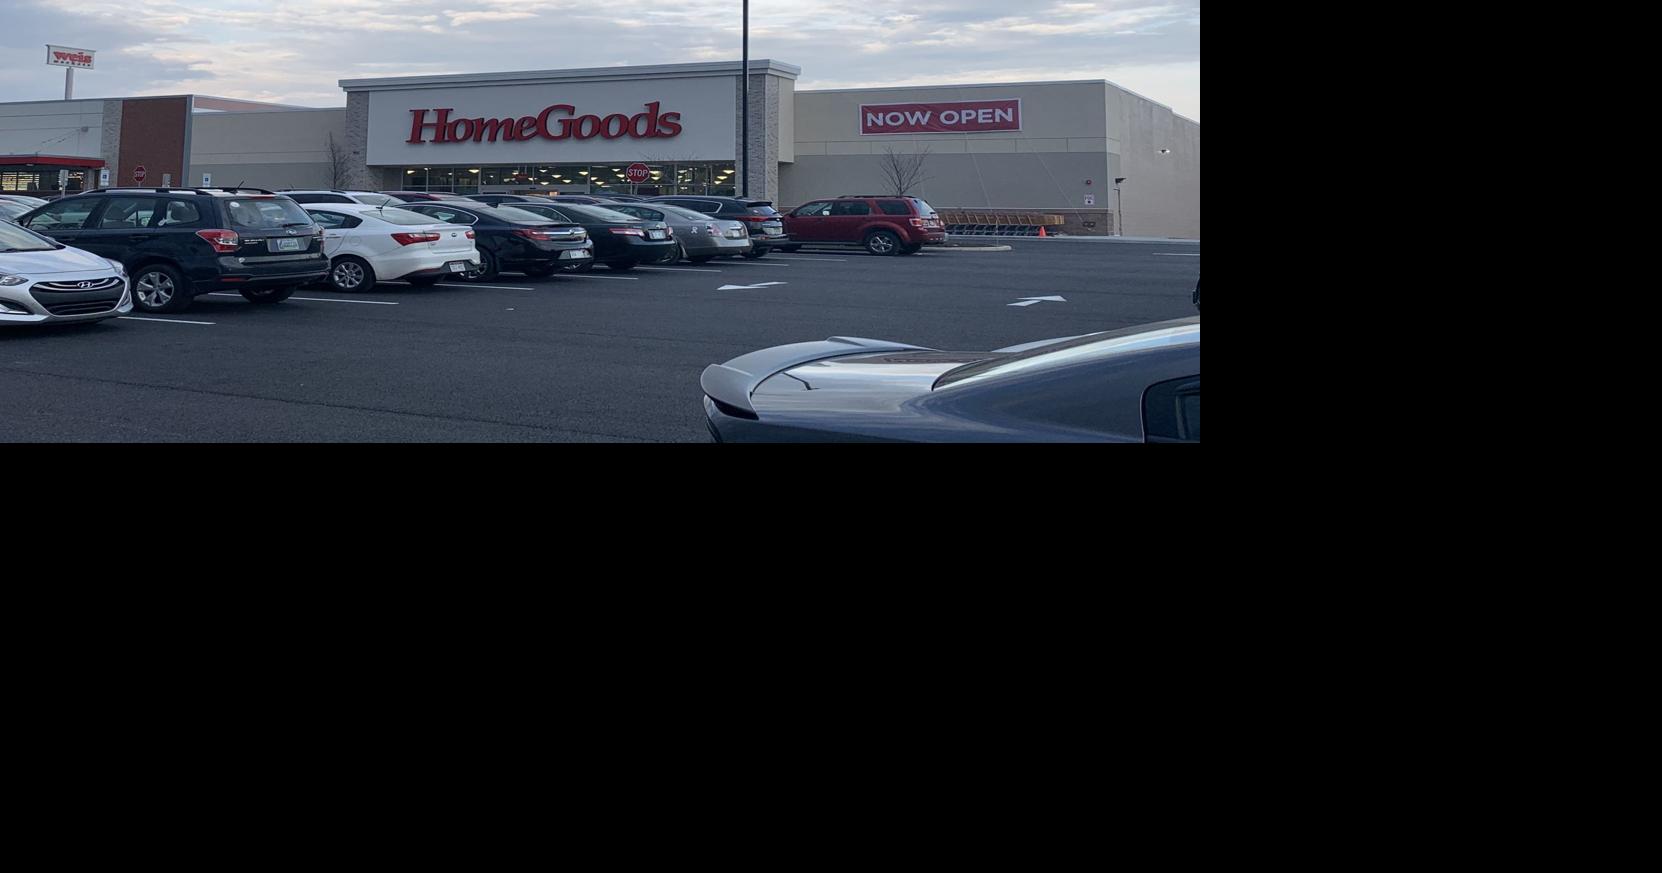 New Weis Market to open in Berkeley County today, HomeGoods soon to follow, Journal-news